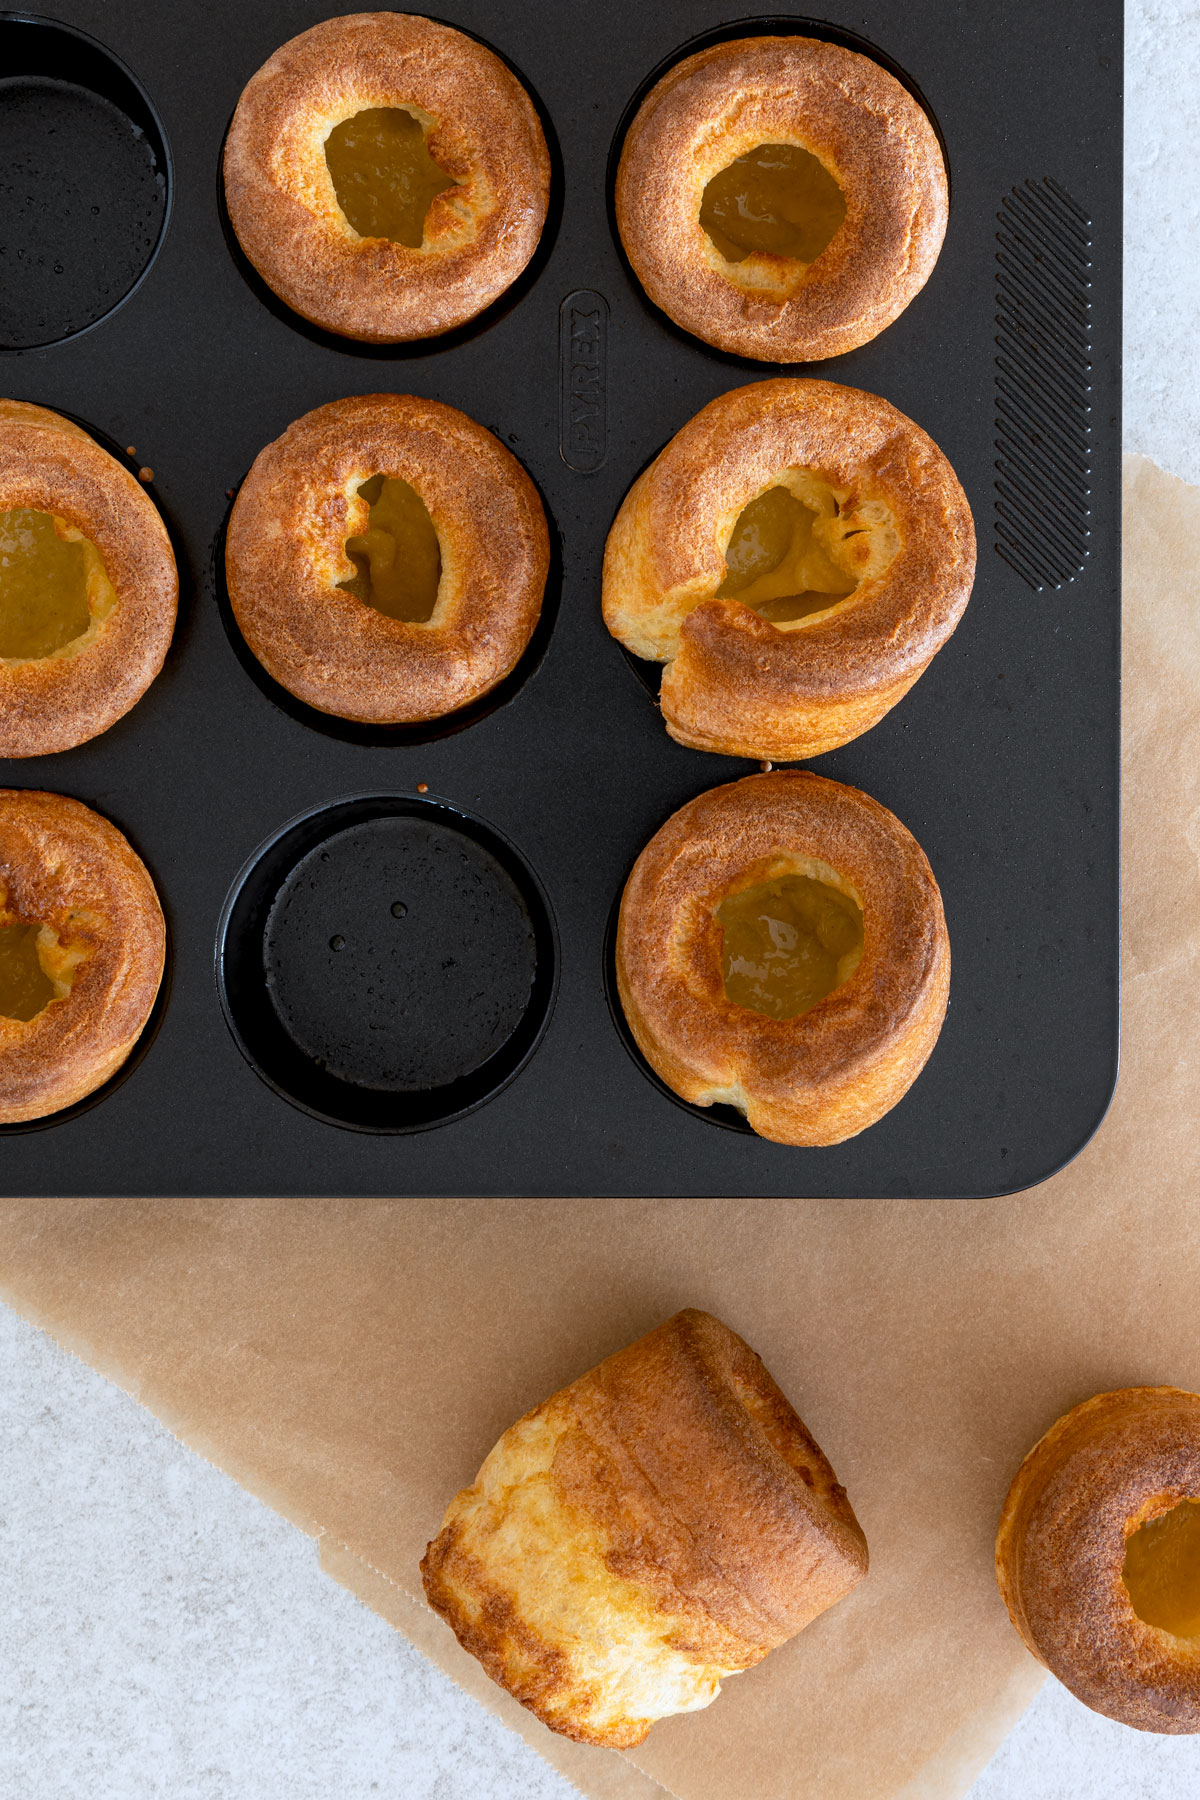 Eye bried view - Yorkshire puddings on a metal tray.